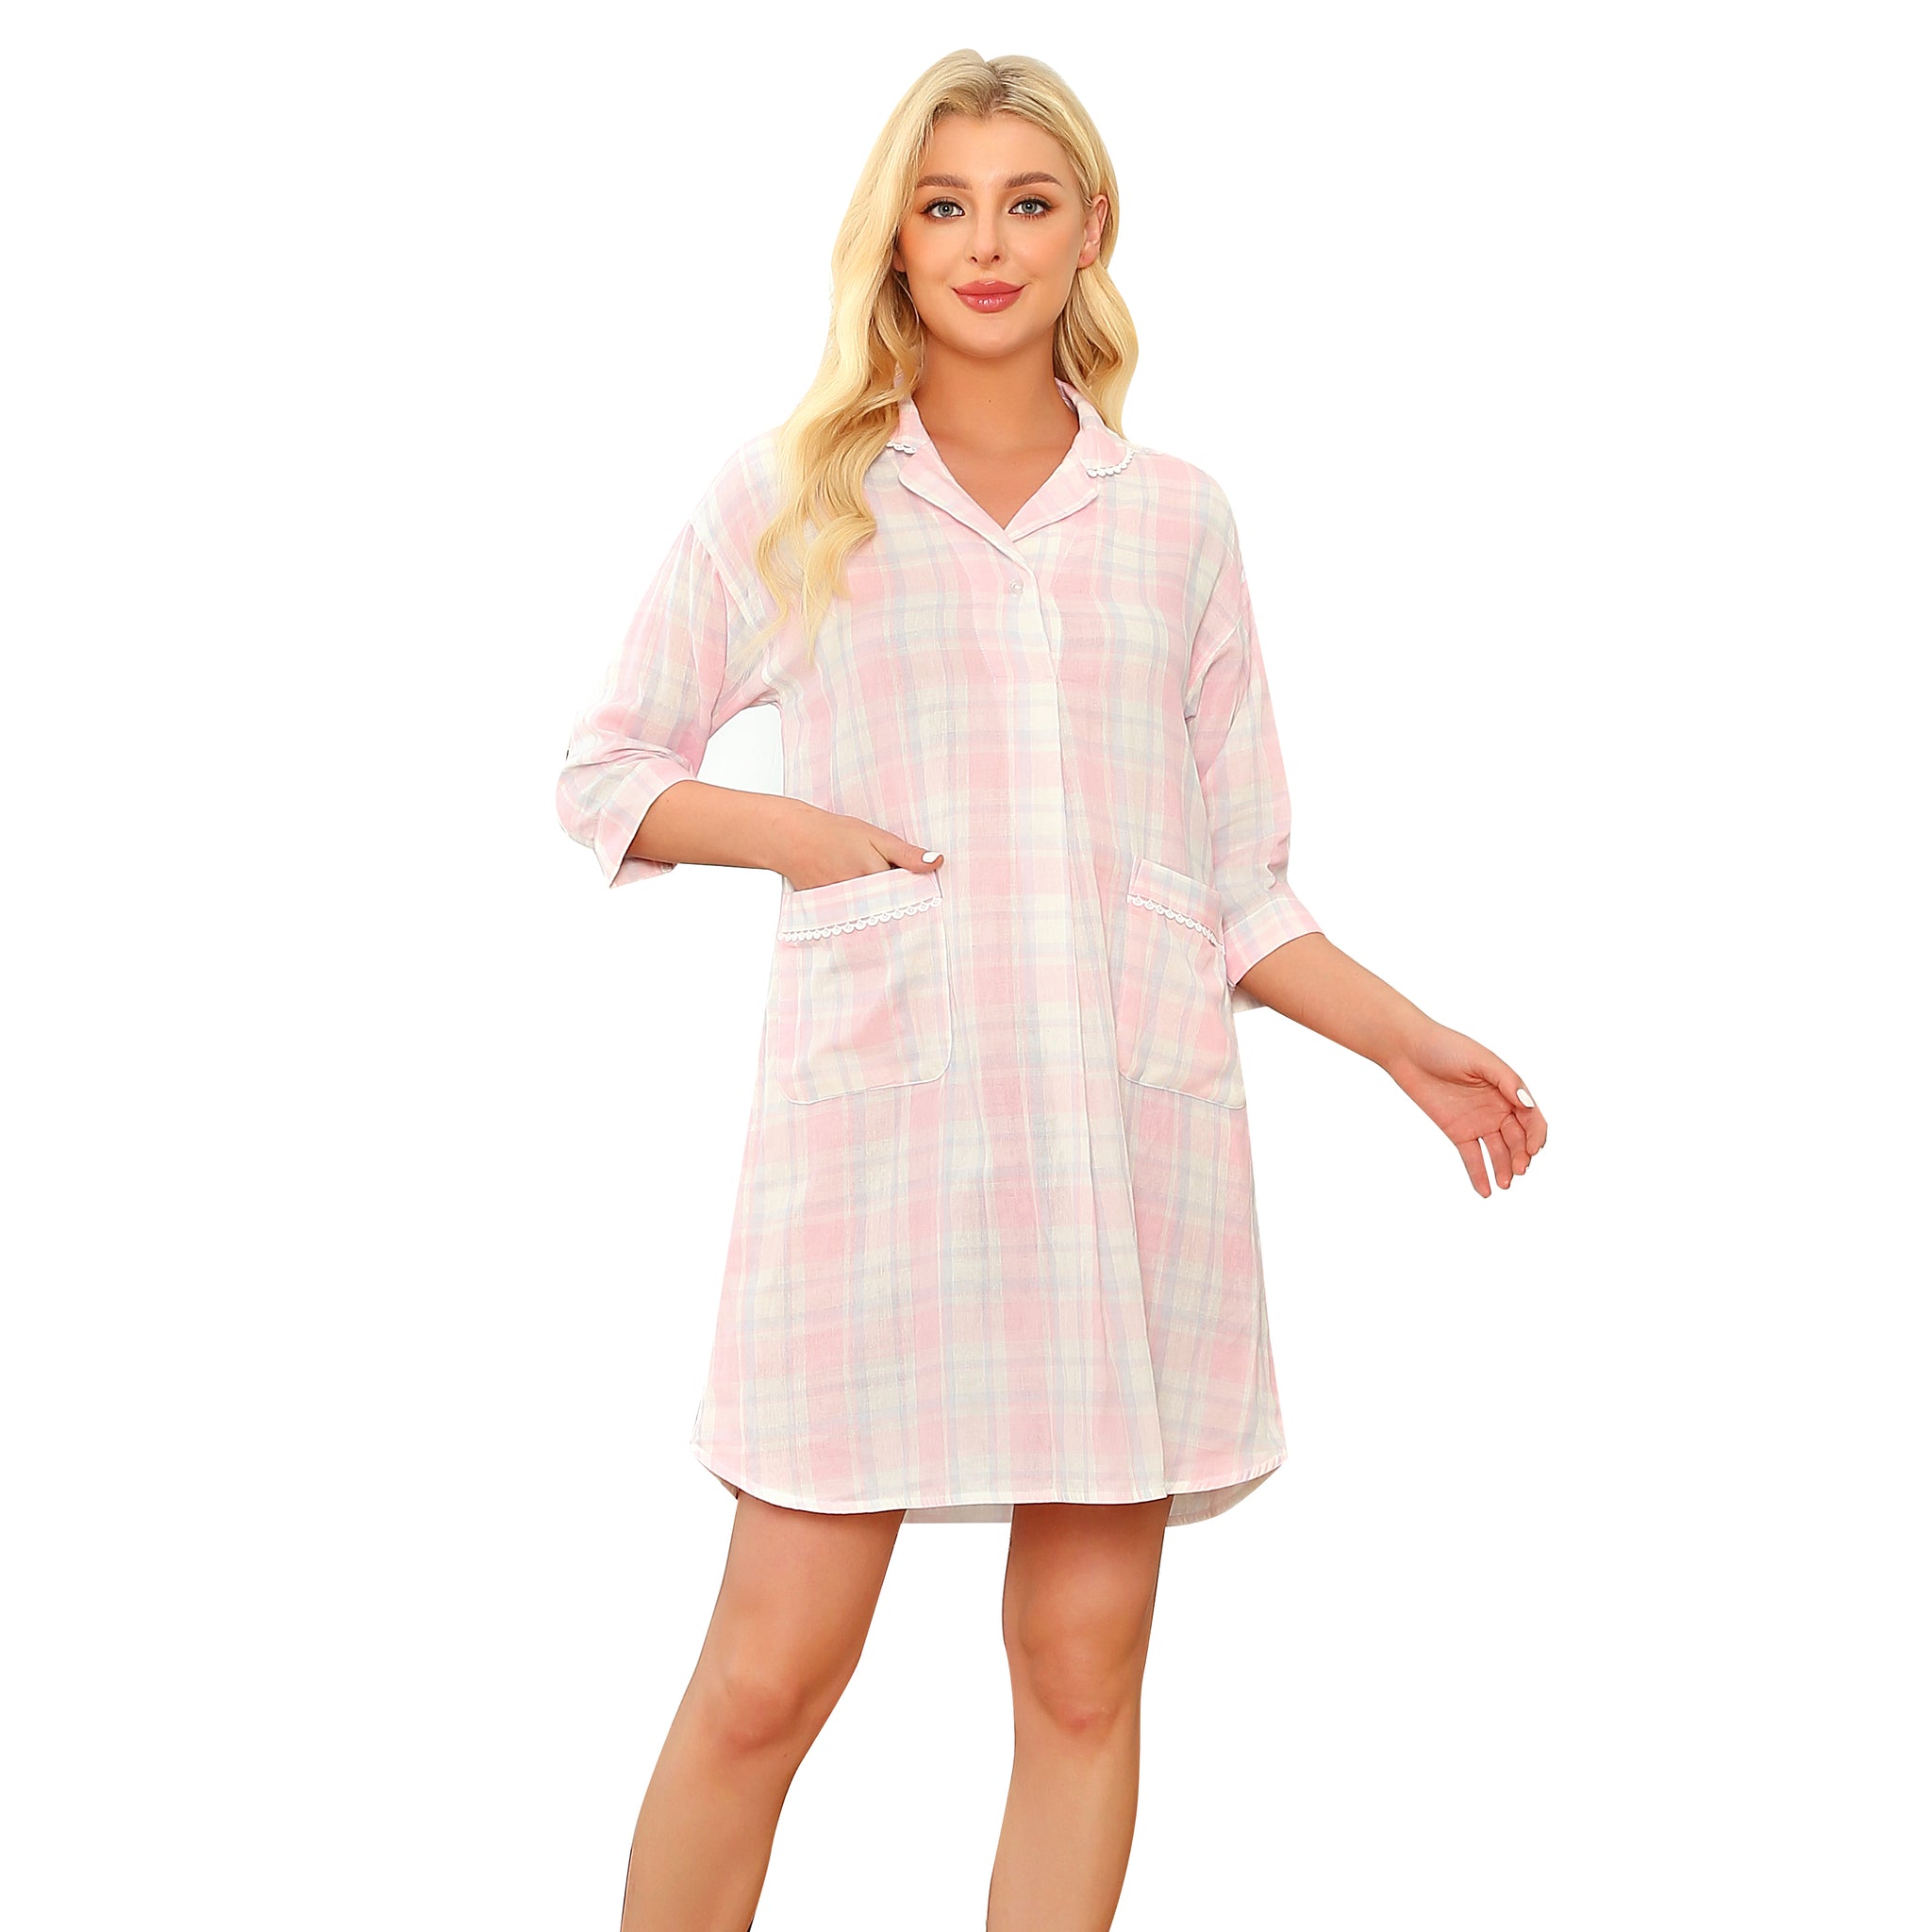 Buy Night Gown Online at Best Price in India | Myntra